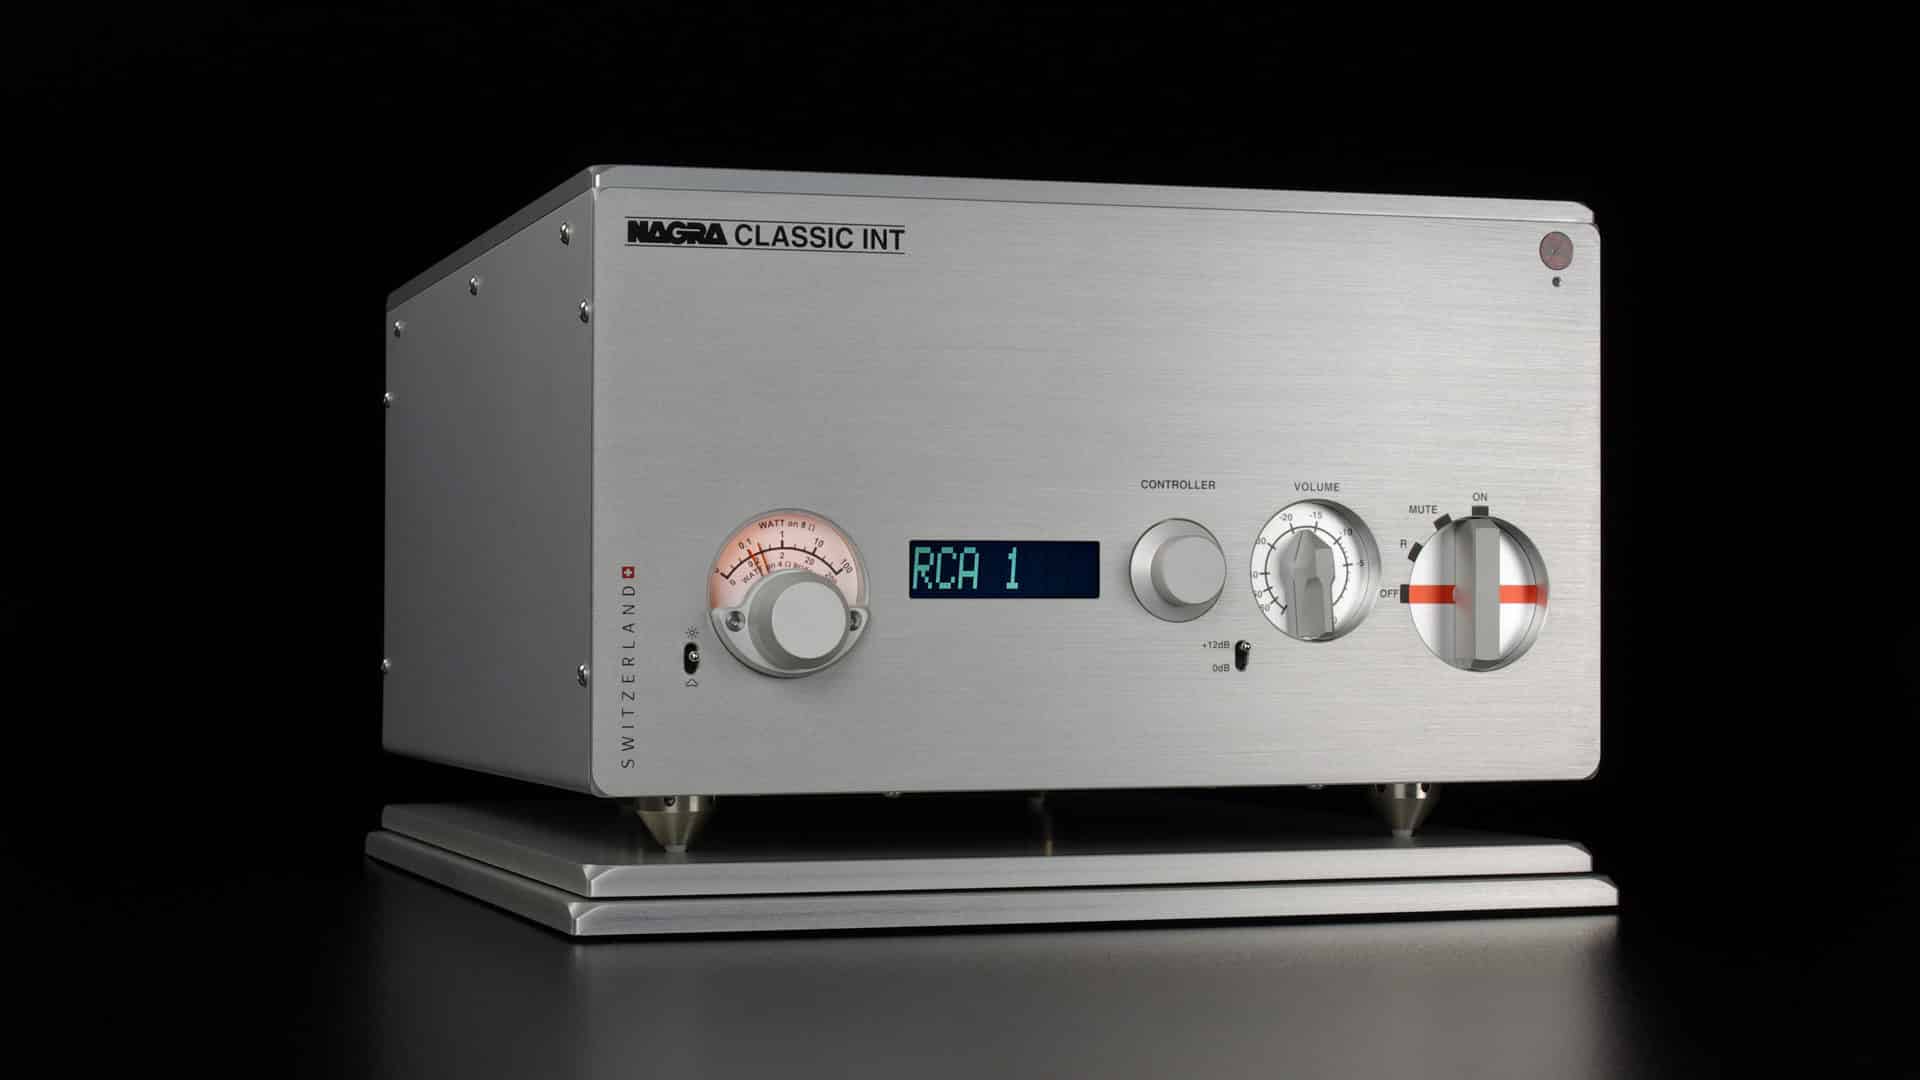 Nagra Classic INT Integrated Amplifier solid state stereo Mosfet transistor transformer modulometer front VFS